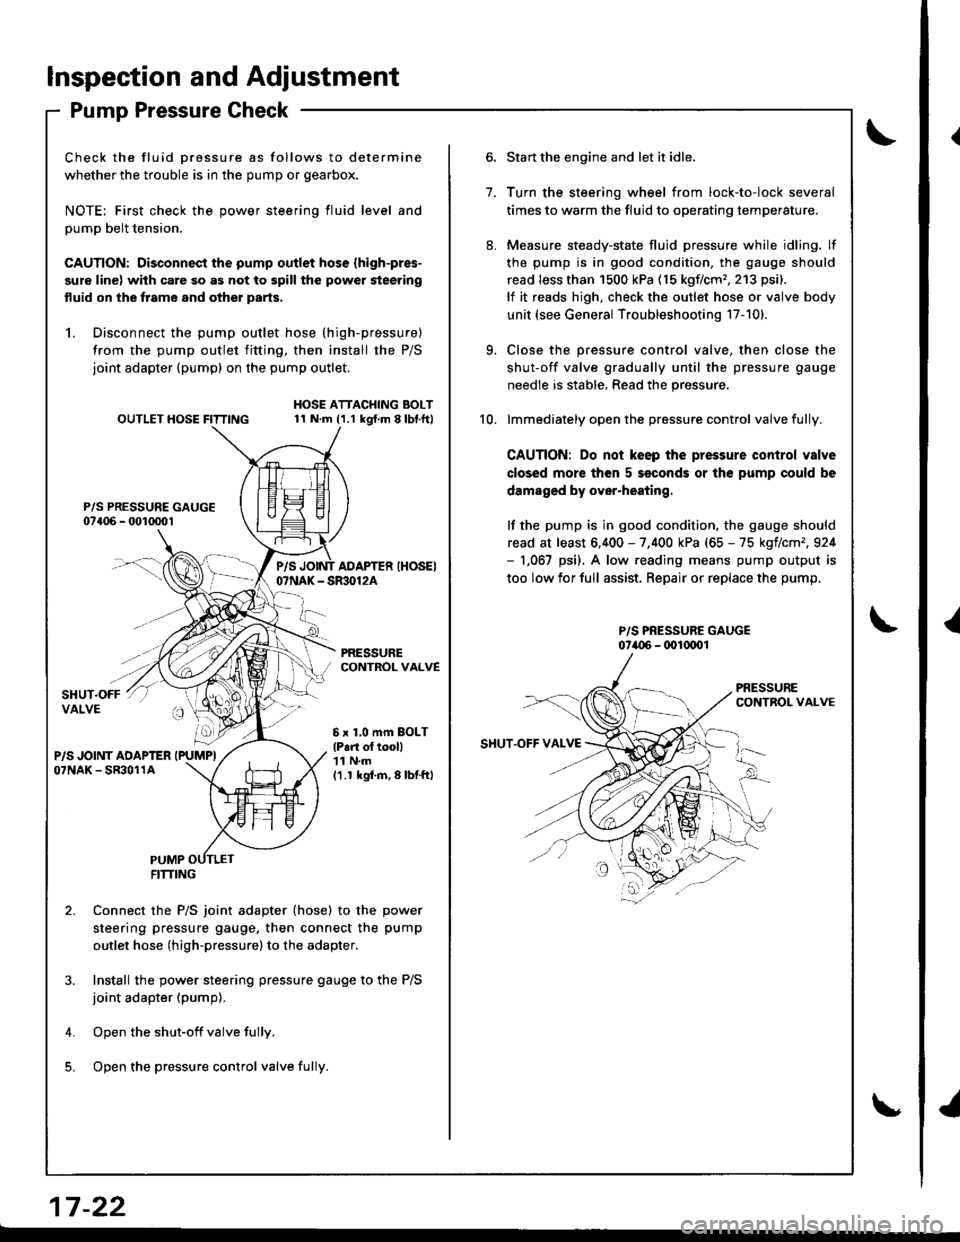 HONDA INTEGRA 1998 4.G Workshop Manual Inspection and Adjustment
Pump Pressure Check
Check the fluid Dressure as follows to determine
whether the trouble is in the pump or gearbox.
NOTE; First check the power steering fluid level and
pump 